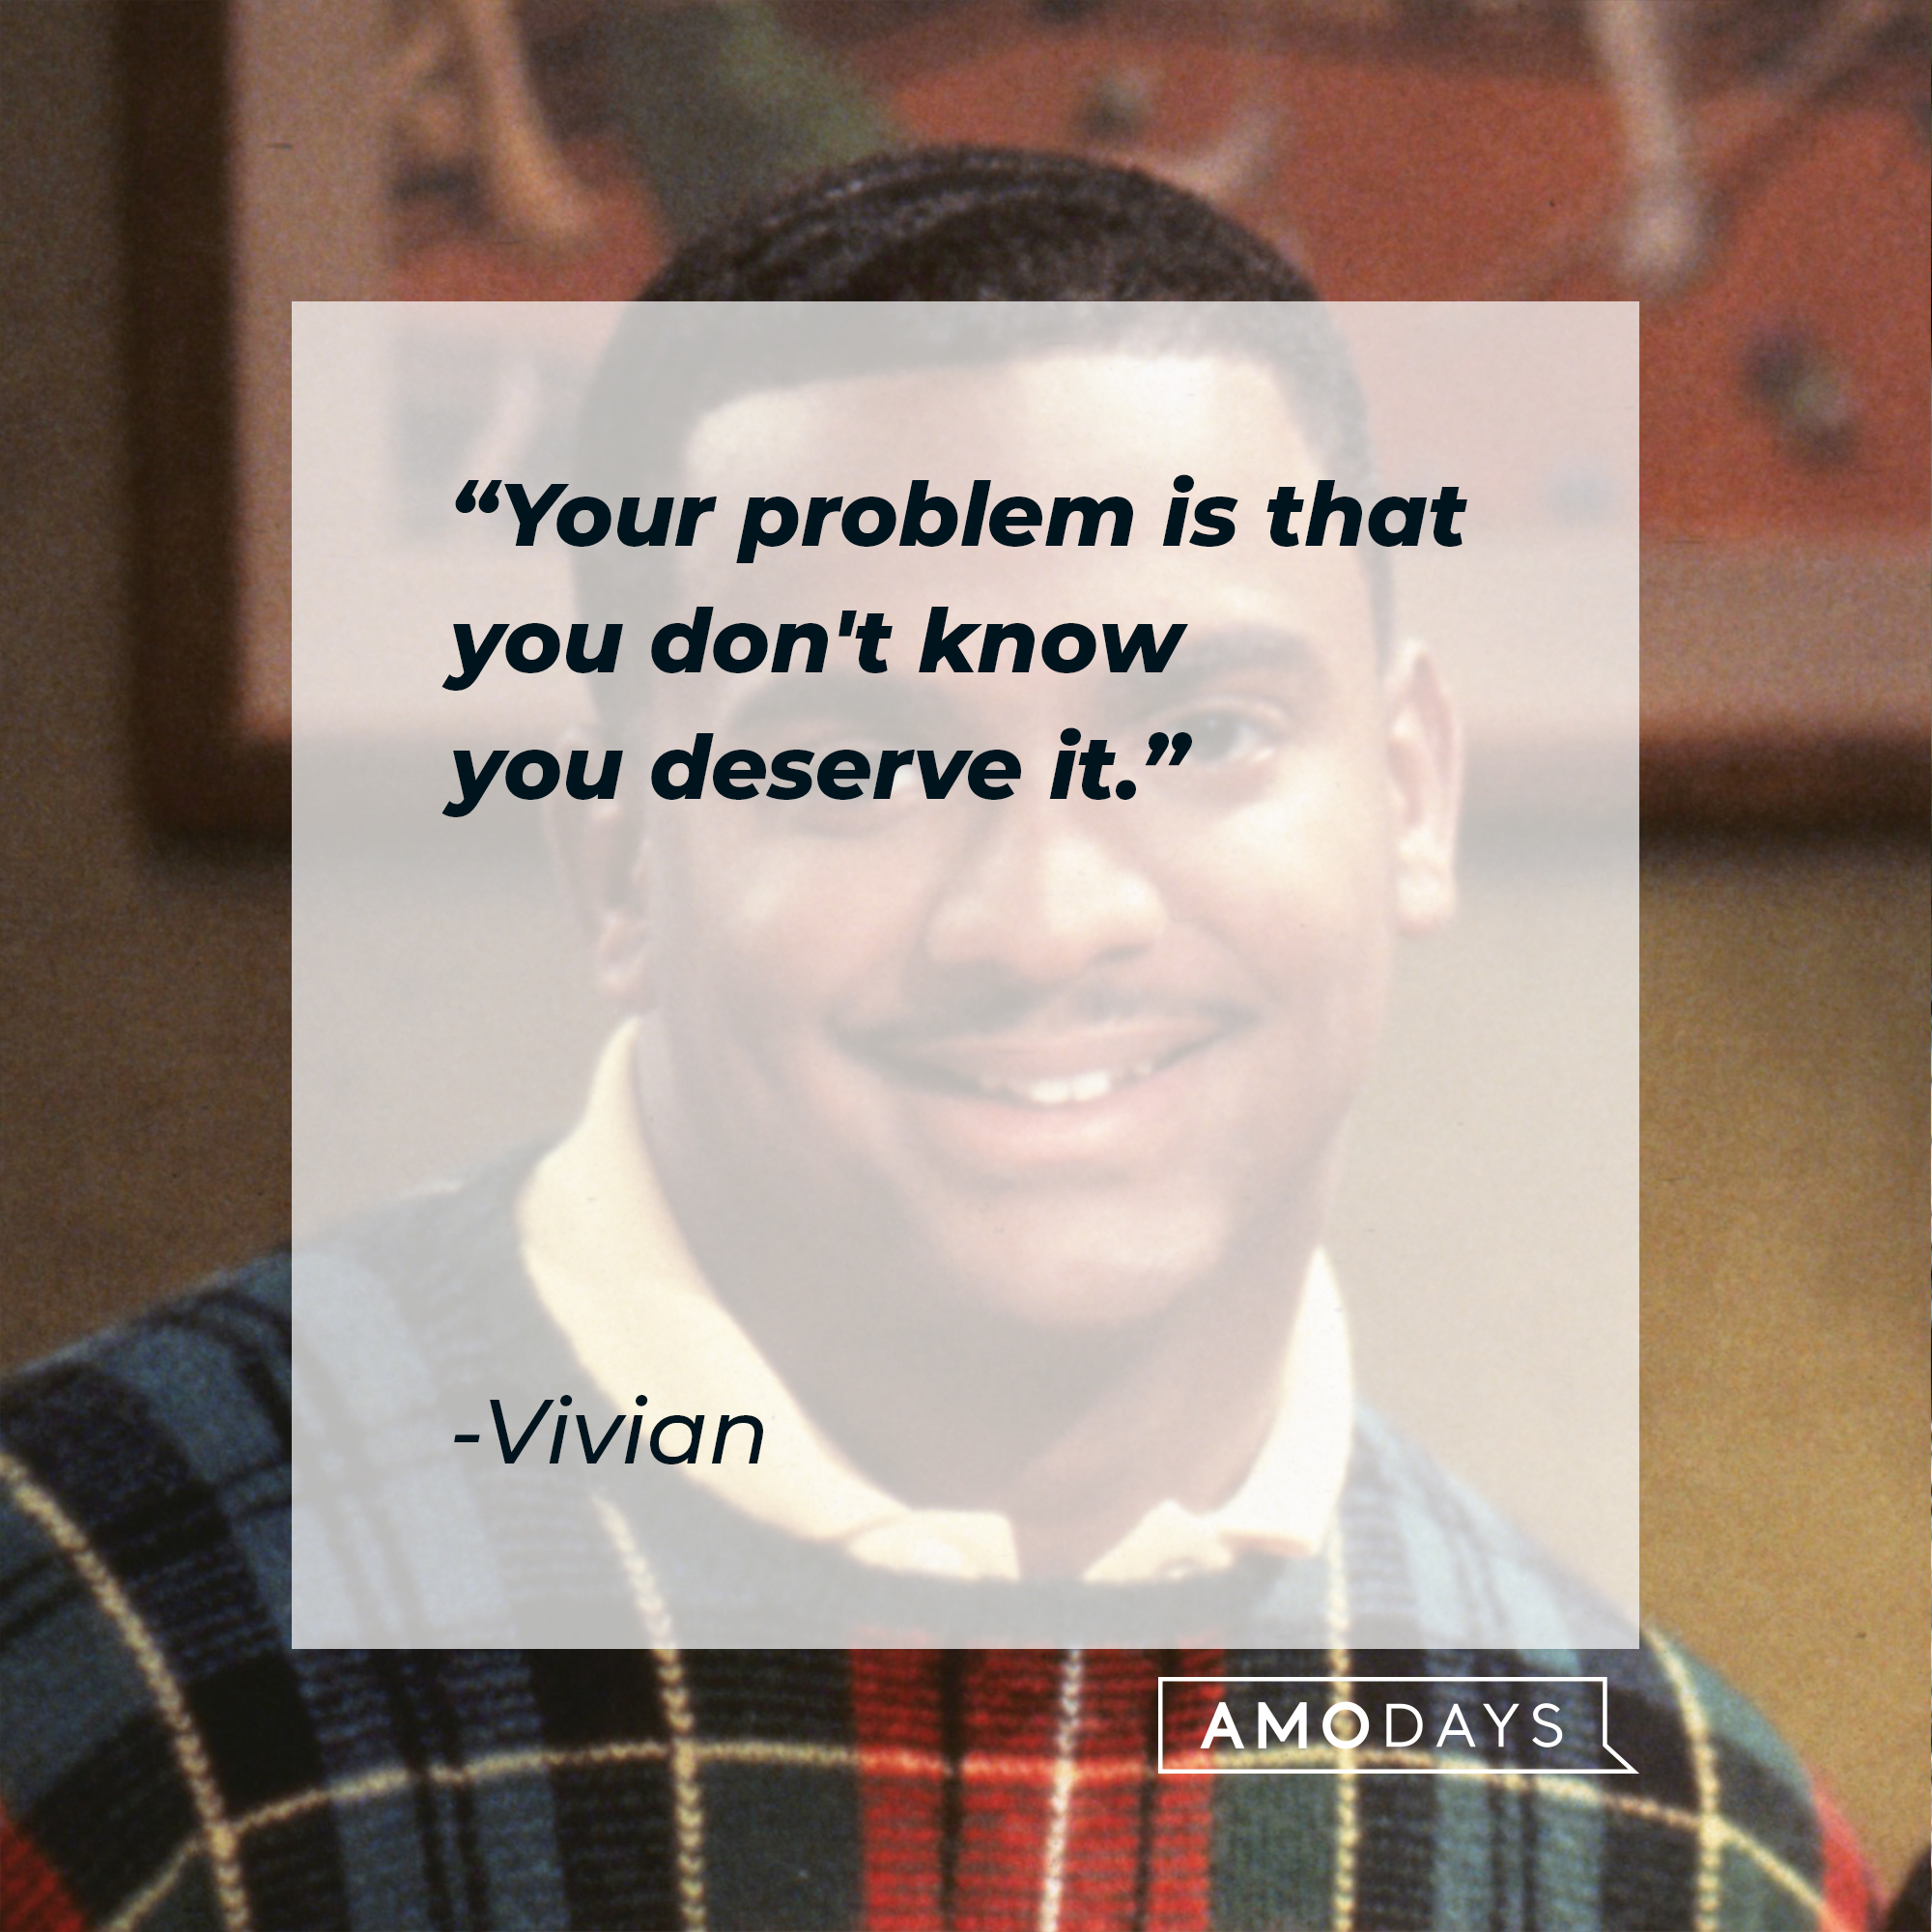 A picture of Carlton with Vivian’s quote: “Your problem is that you don't know you deserve it.”  | Source: facebook.com/TheFreshPrinceofBelAir